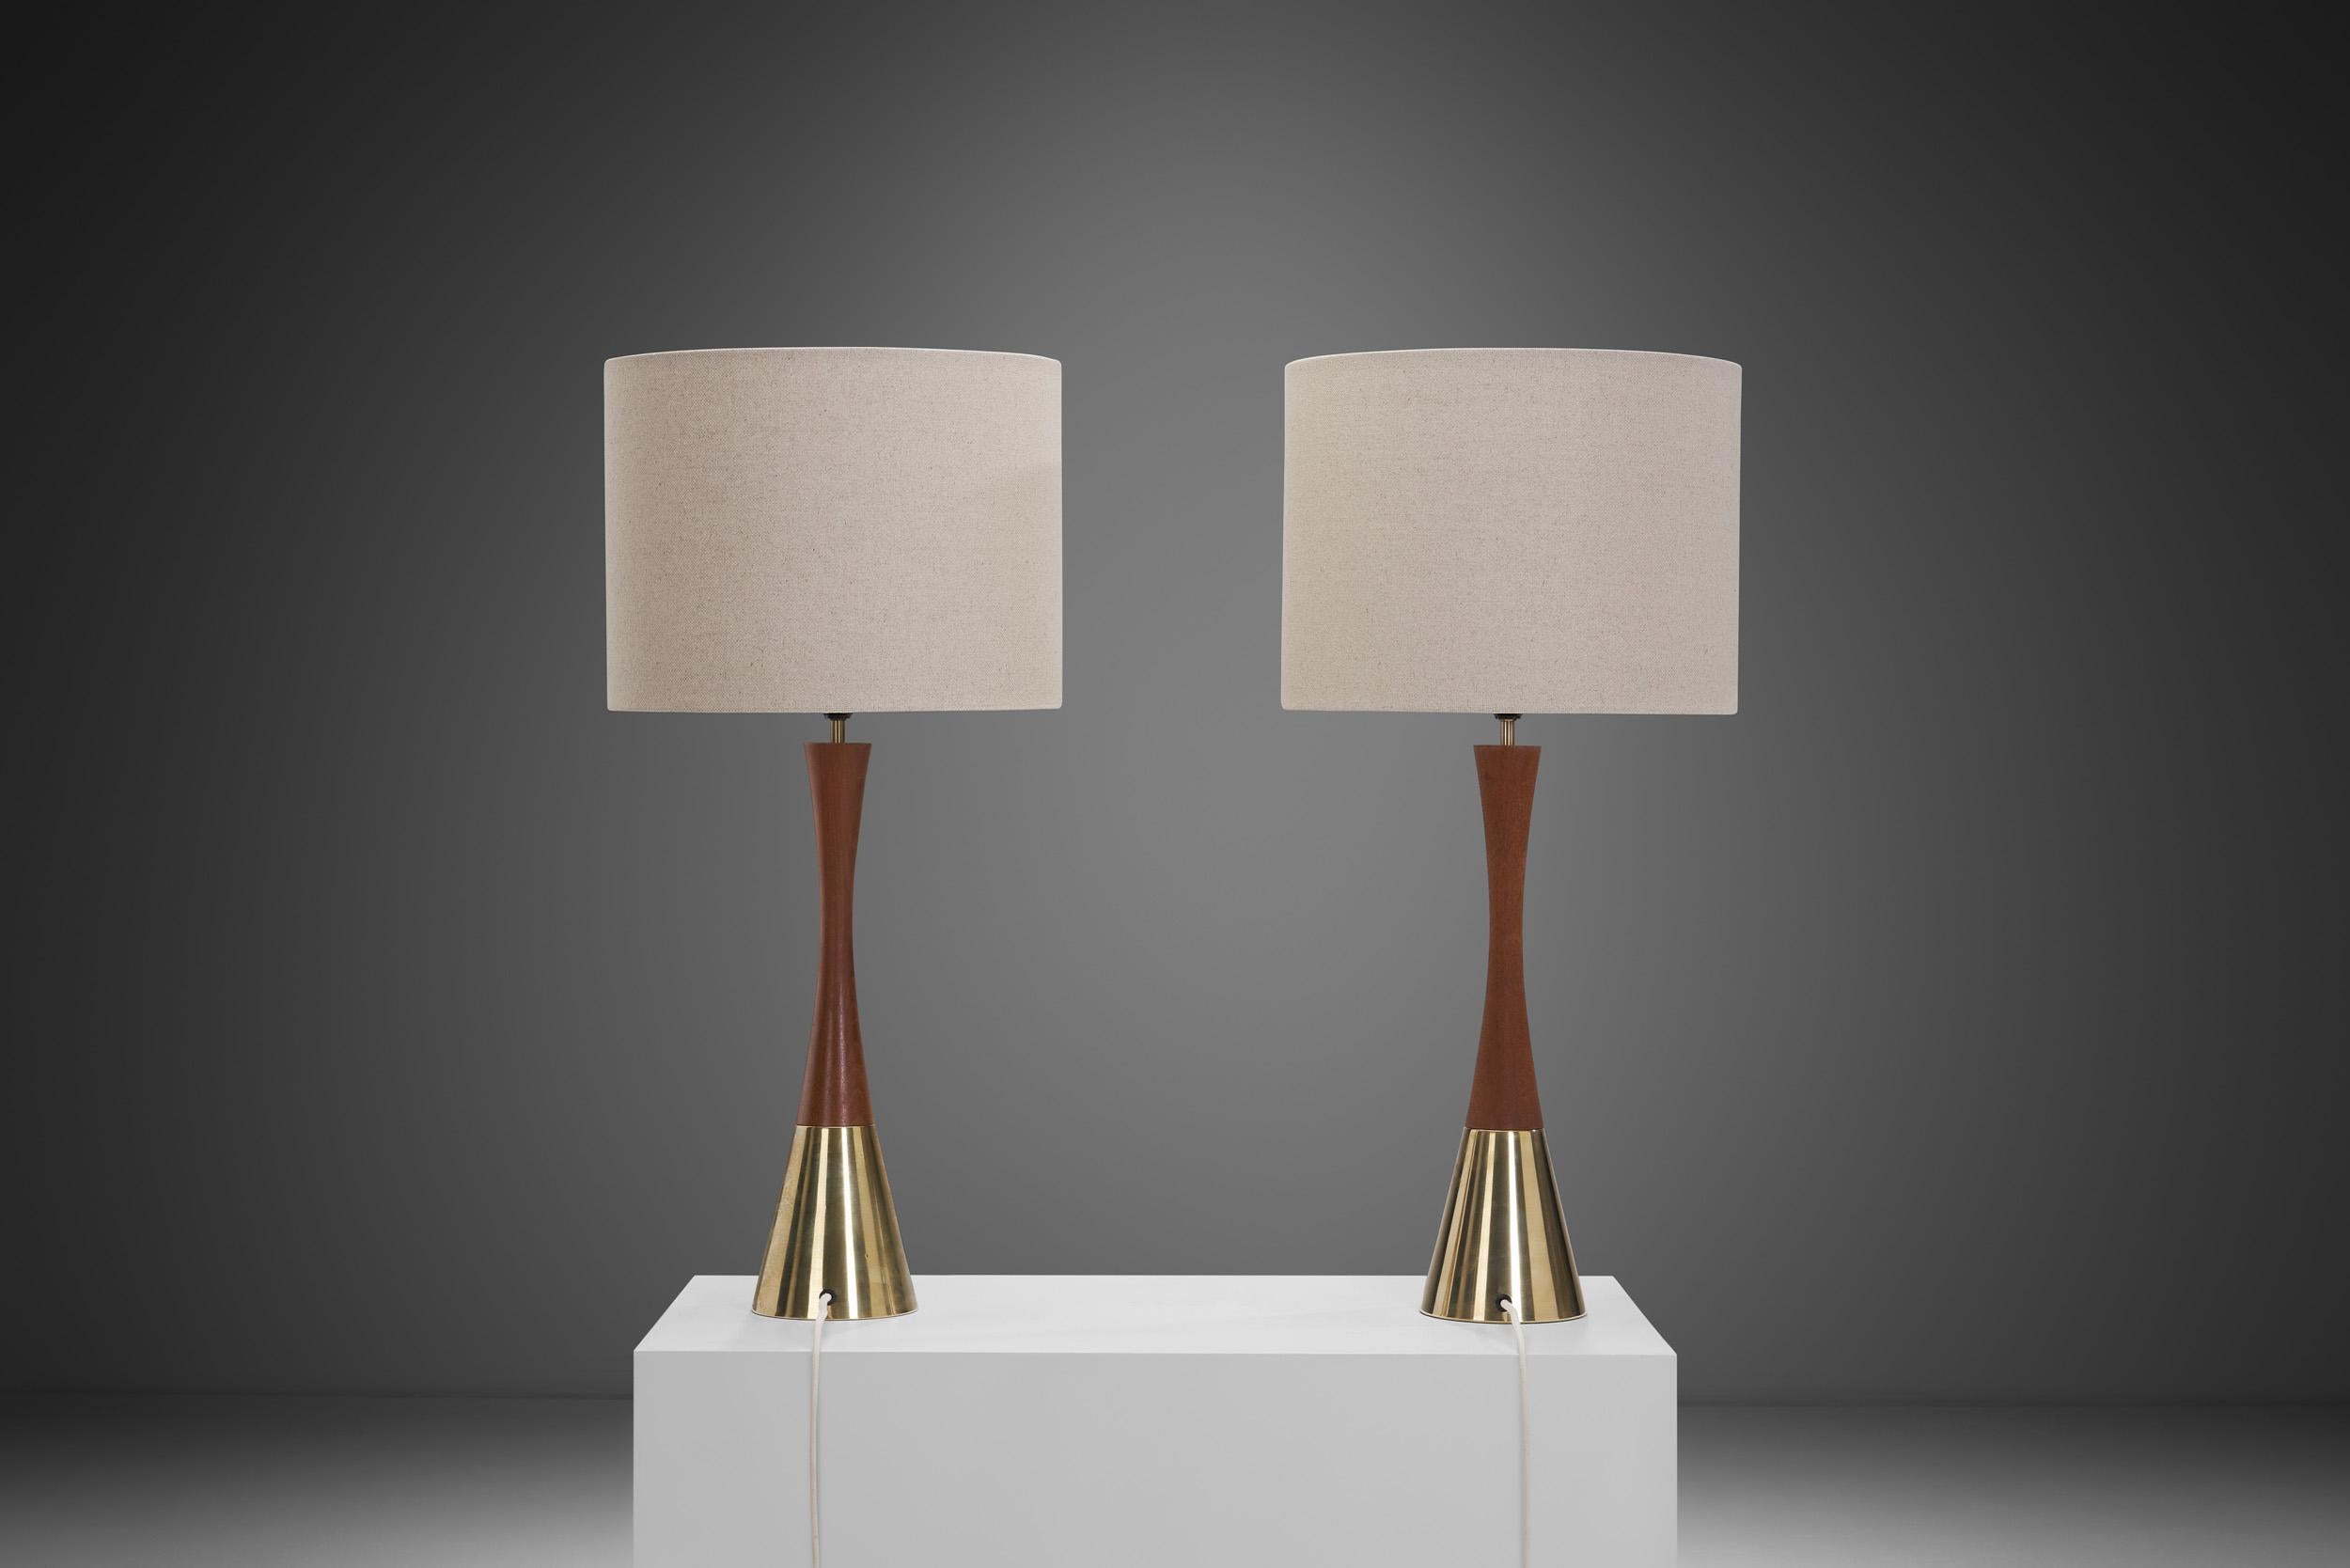 Pair of Teak and Brass Table Lamps by Bergboms, Sweden ca 1970s For Sale 1